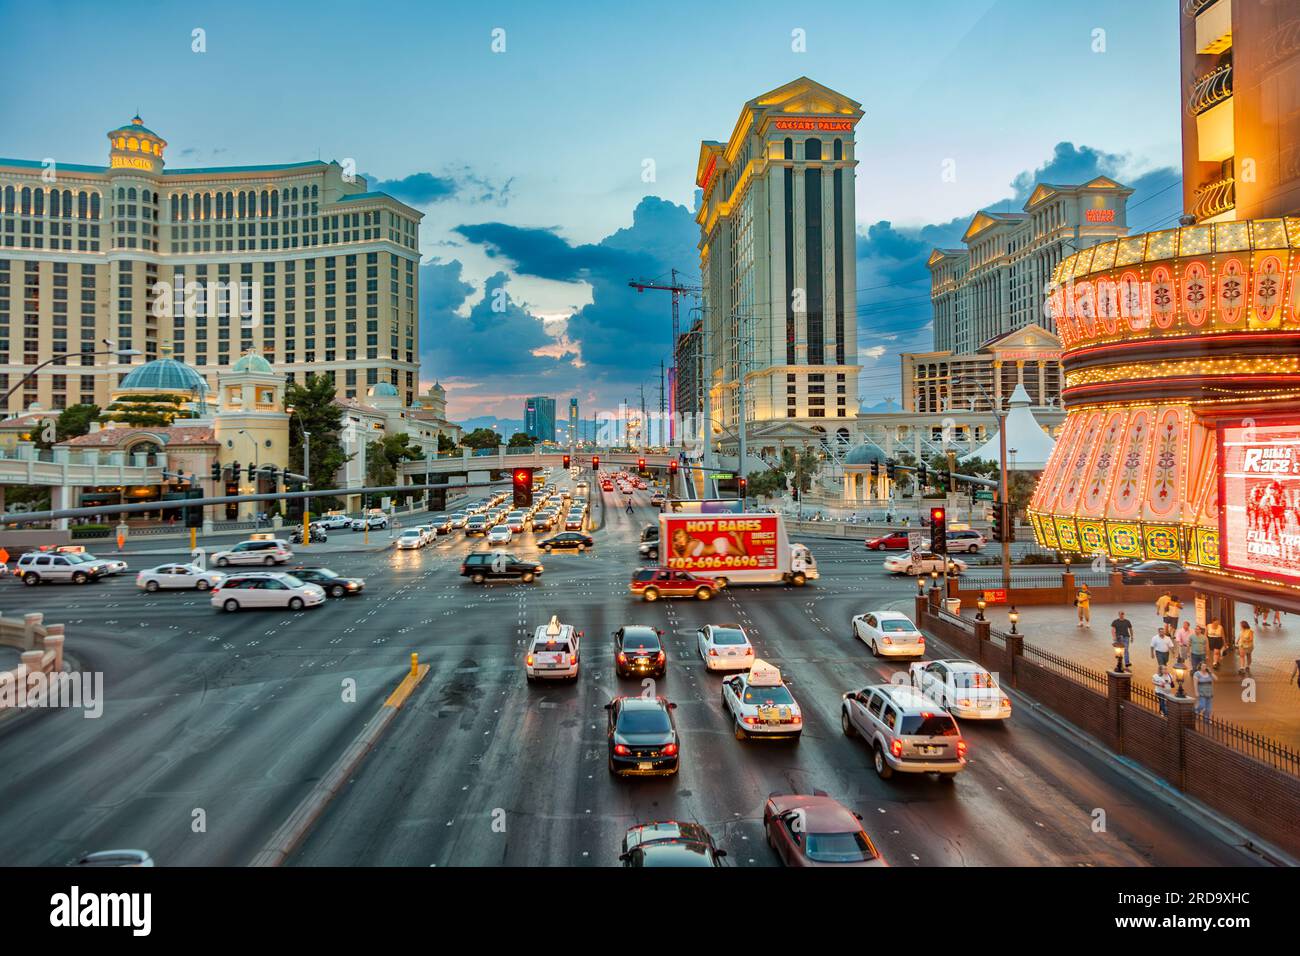 How to get to The Colosseum At Caesars Palace in Paradise by Bus?